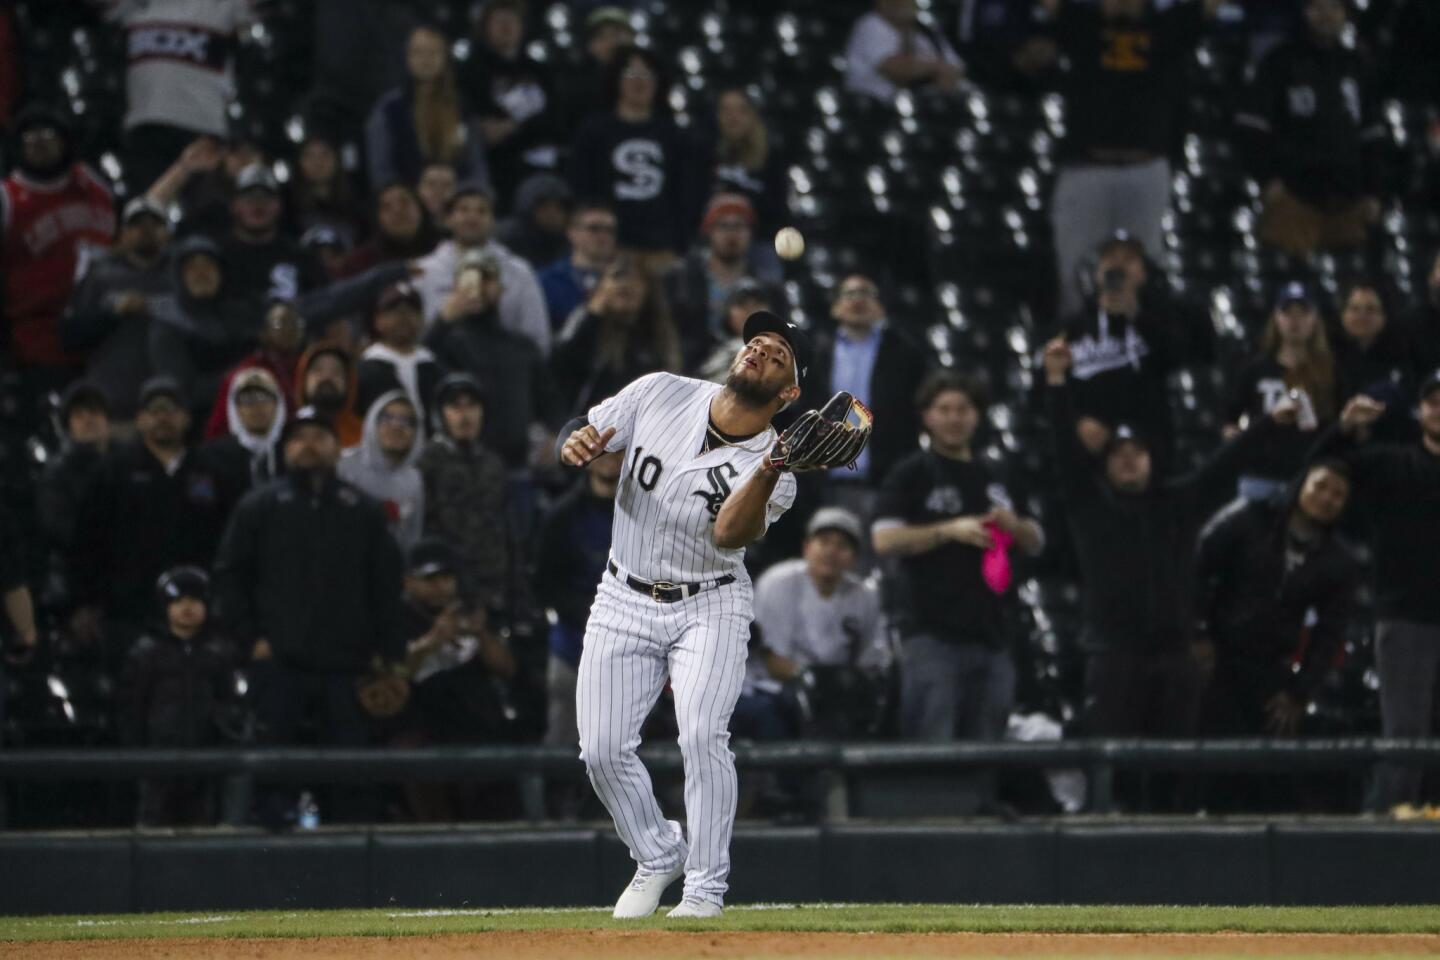 White Sox third baseman Yoan Moncada makes the last out of the game during the ninth inning against the Royals on April 16, 2019, at Guaranteed Rate Field.